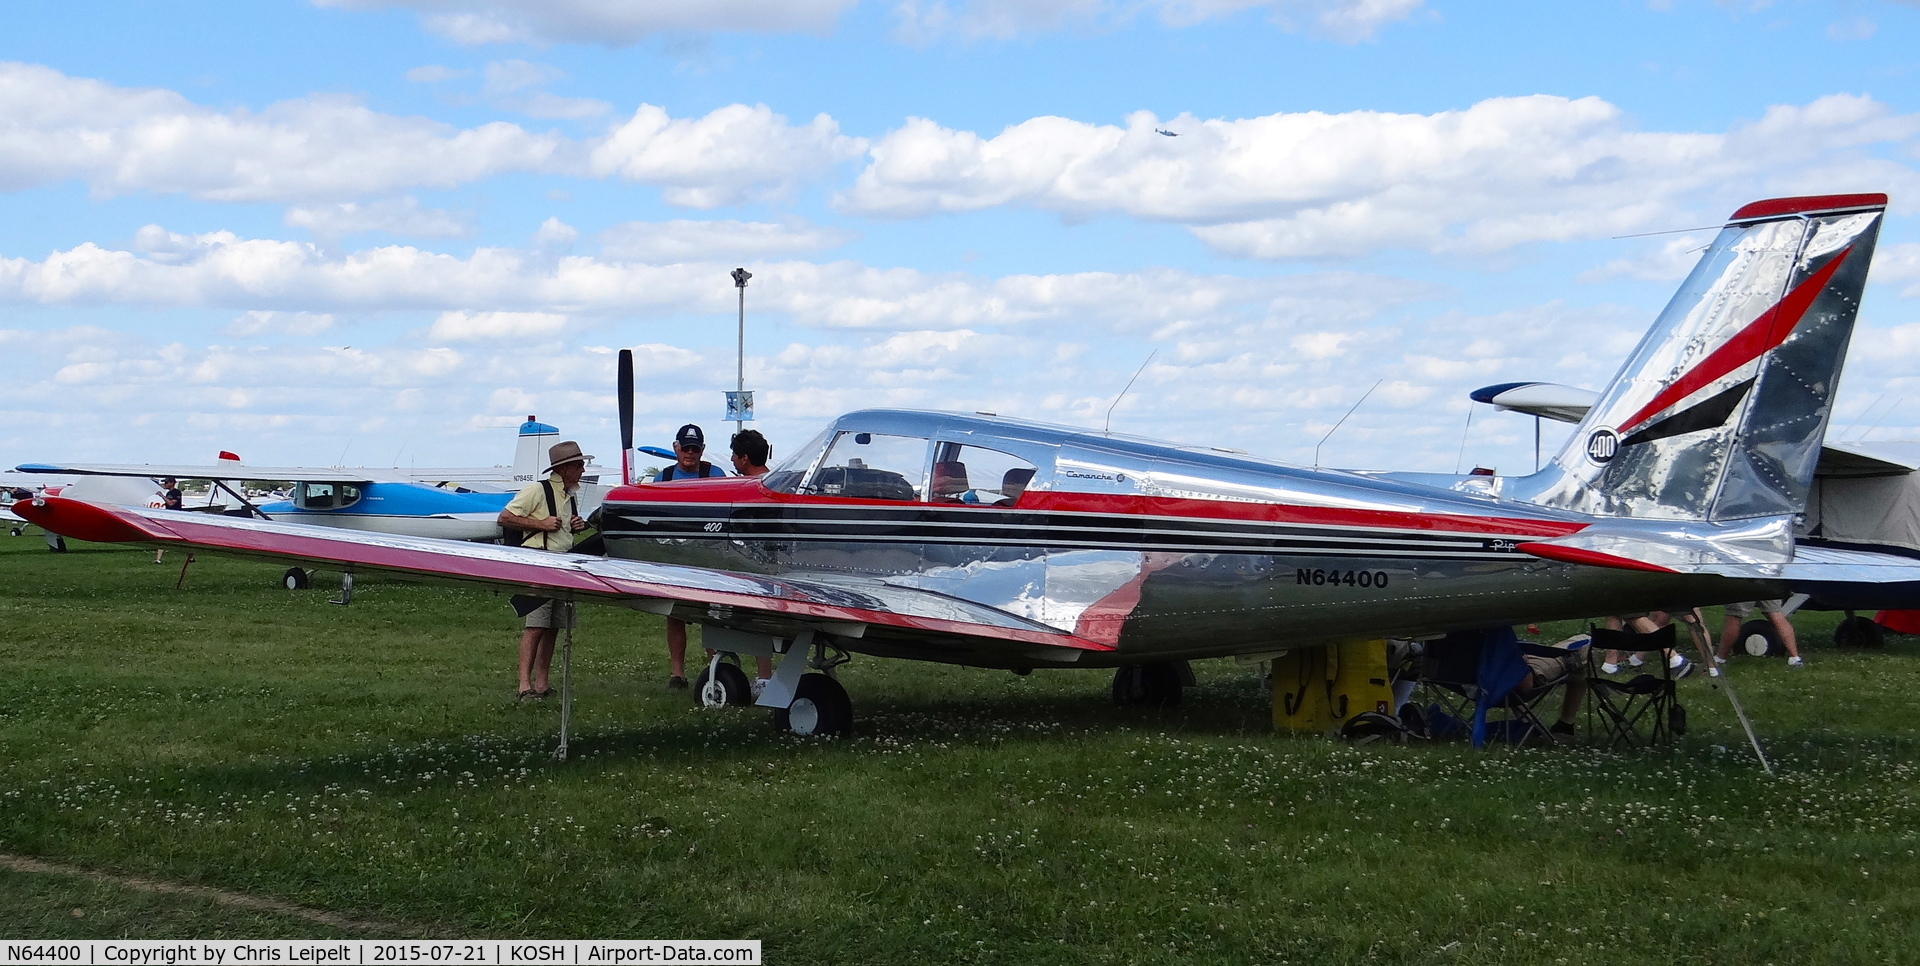 N64400, 1964 Piper PA-24-400 Comanche 400 C/N 26-36, Iowa-based 1964 Piper PA-24-400 at EAA AirVenture 2015.